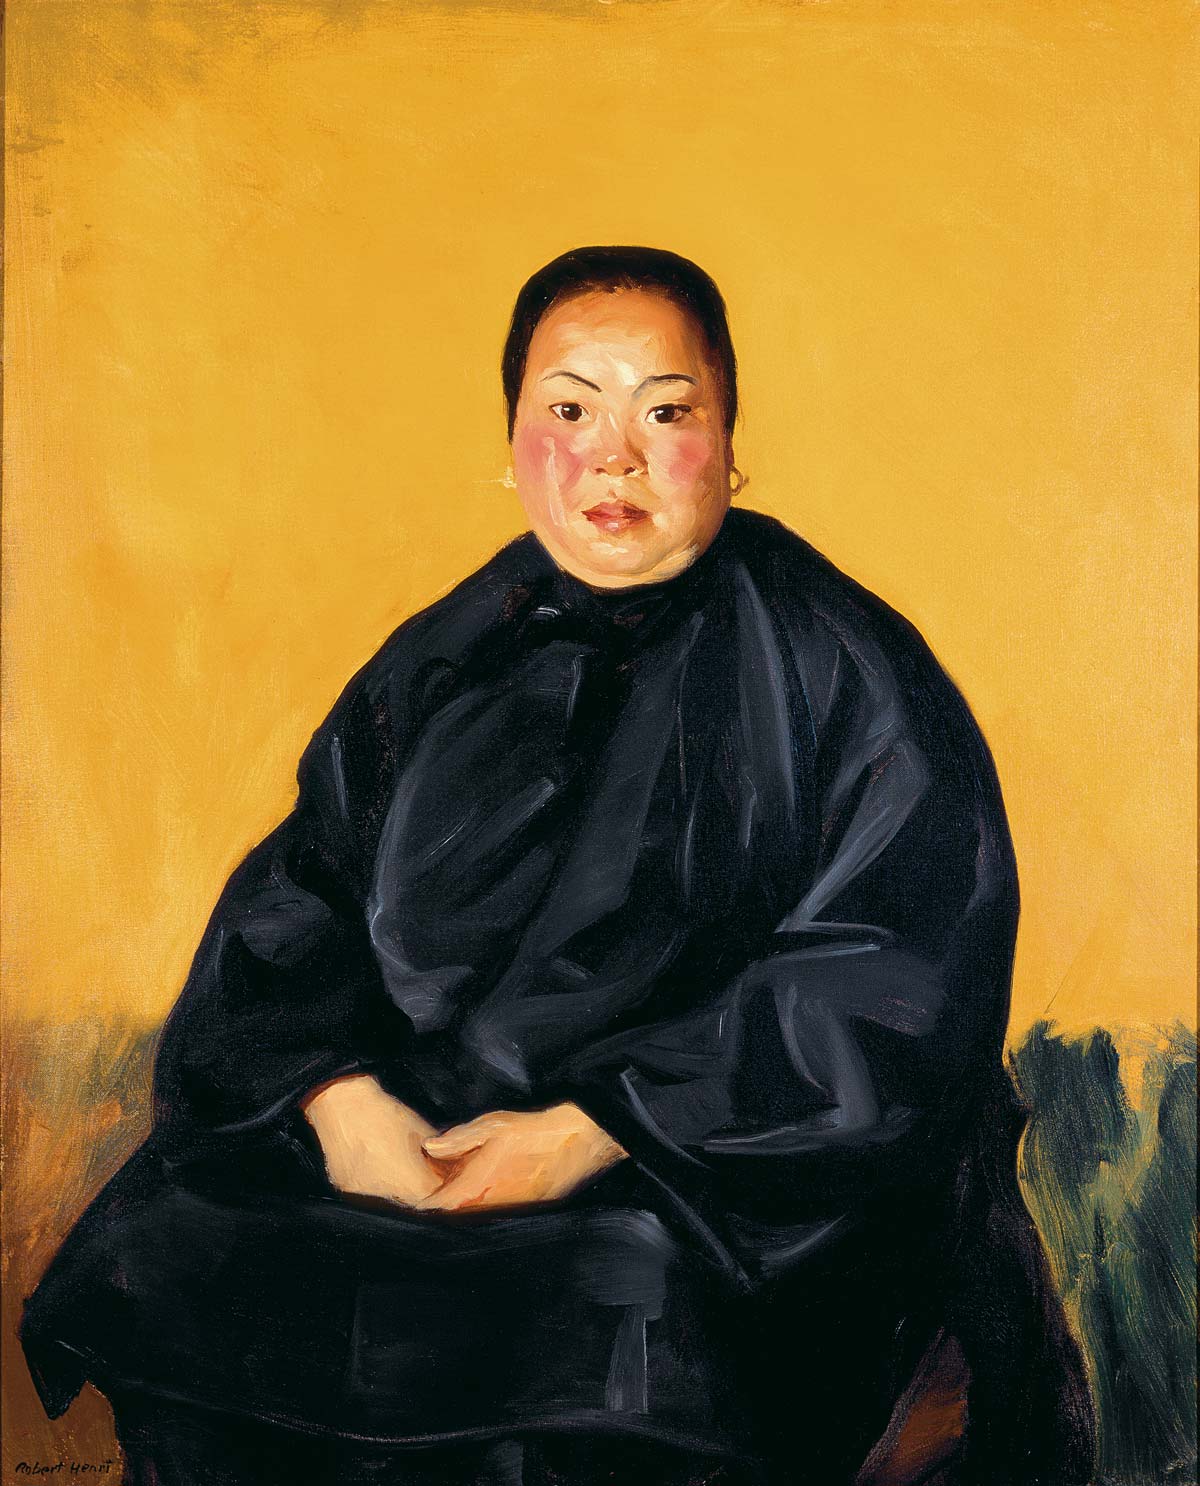 Chinese woman posing in a black oversized shirt